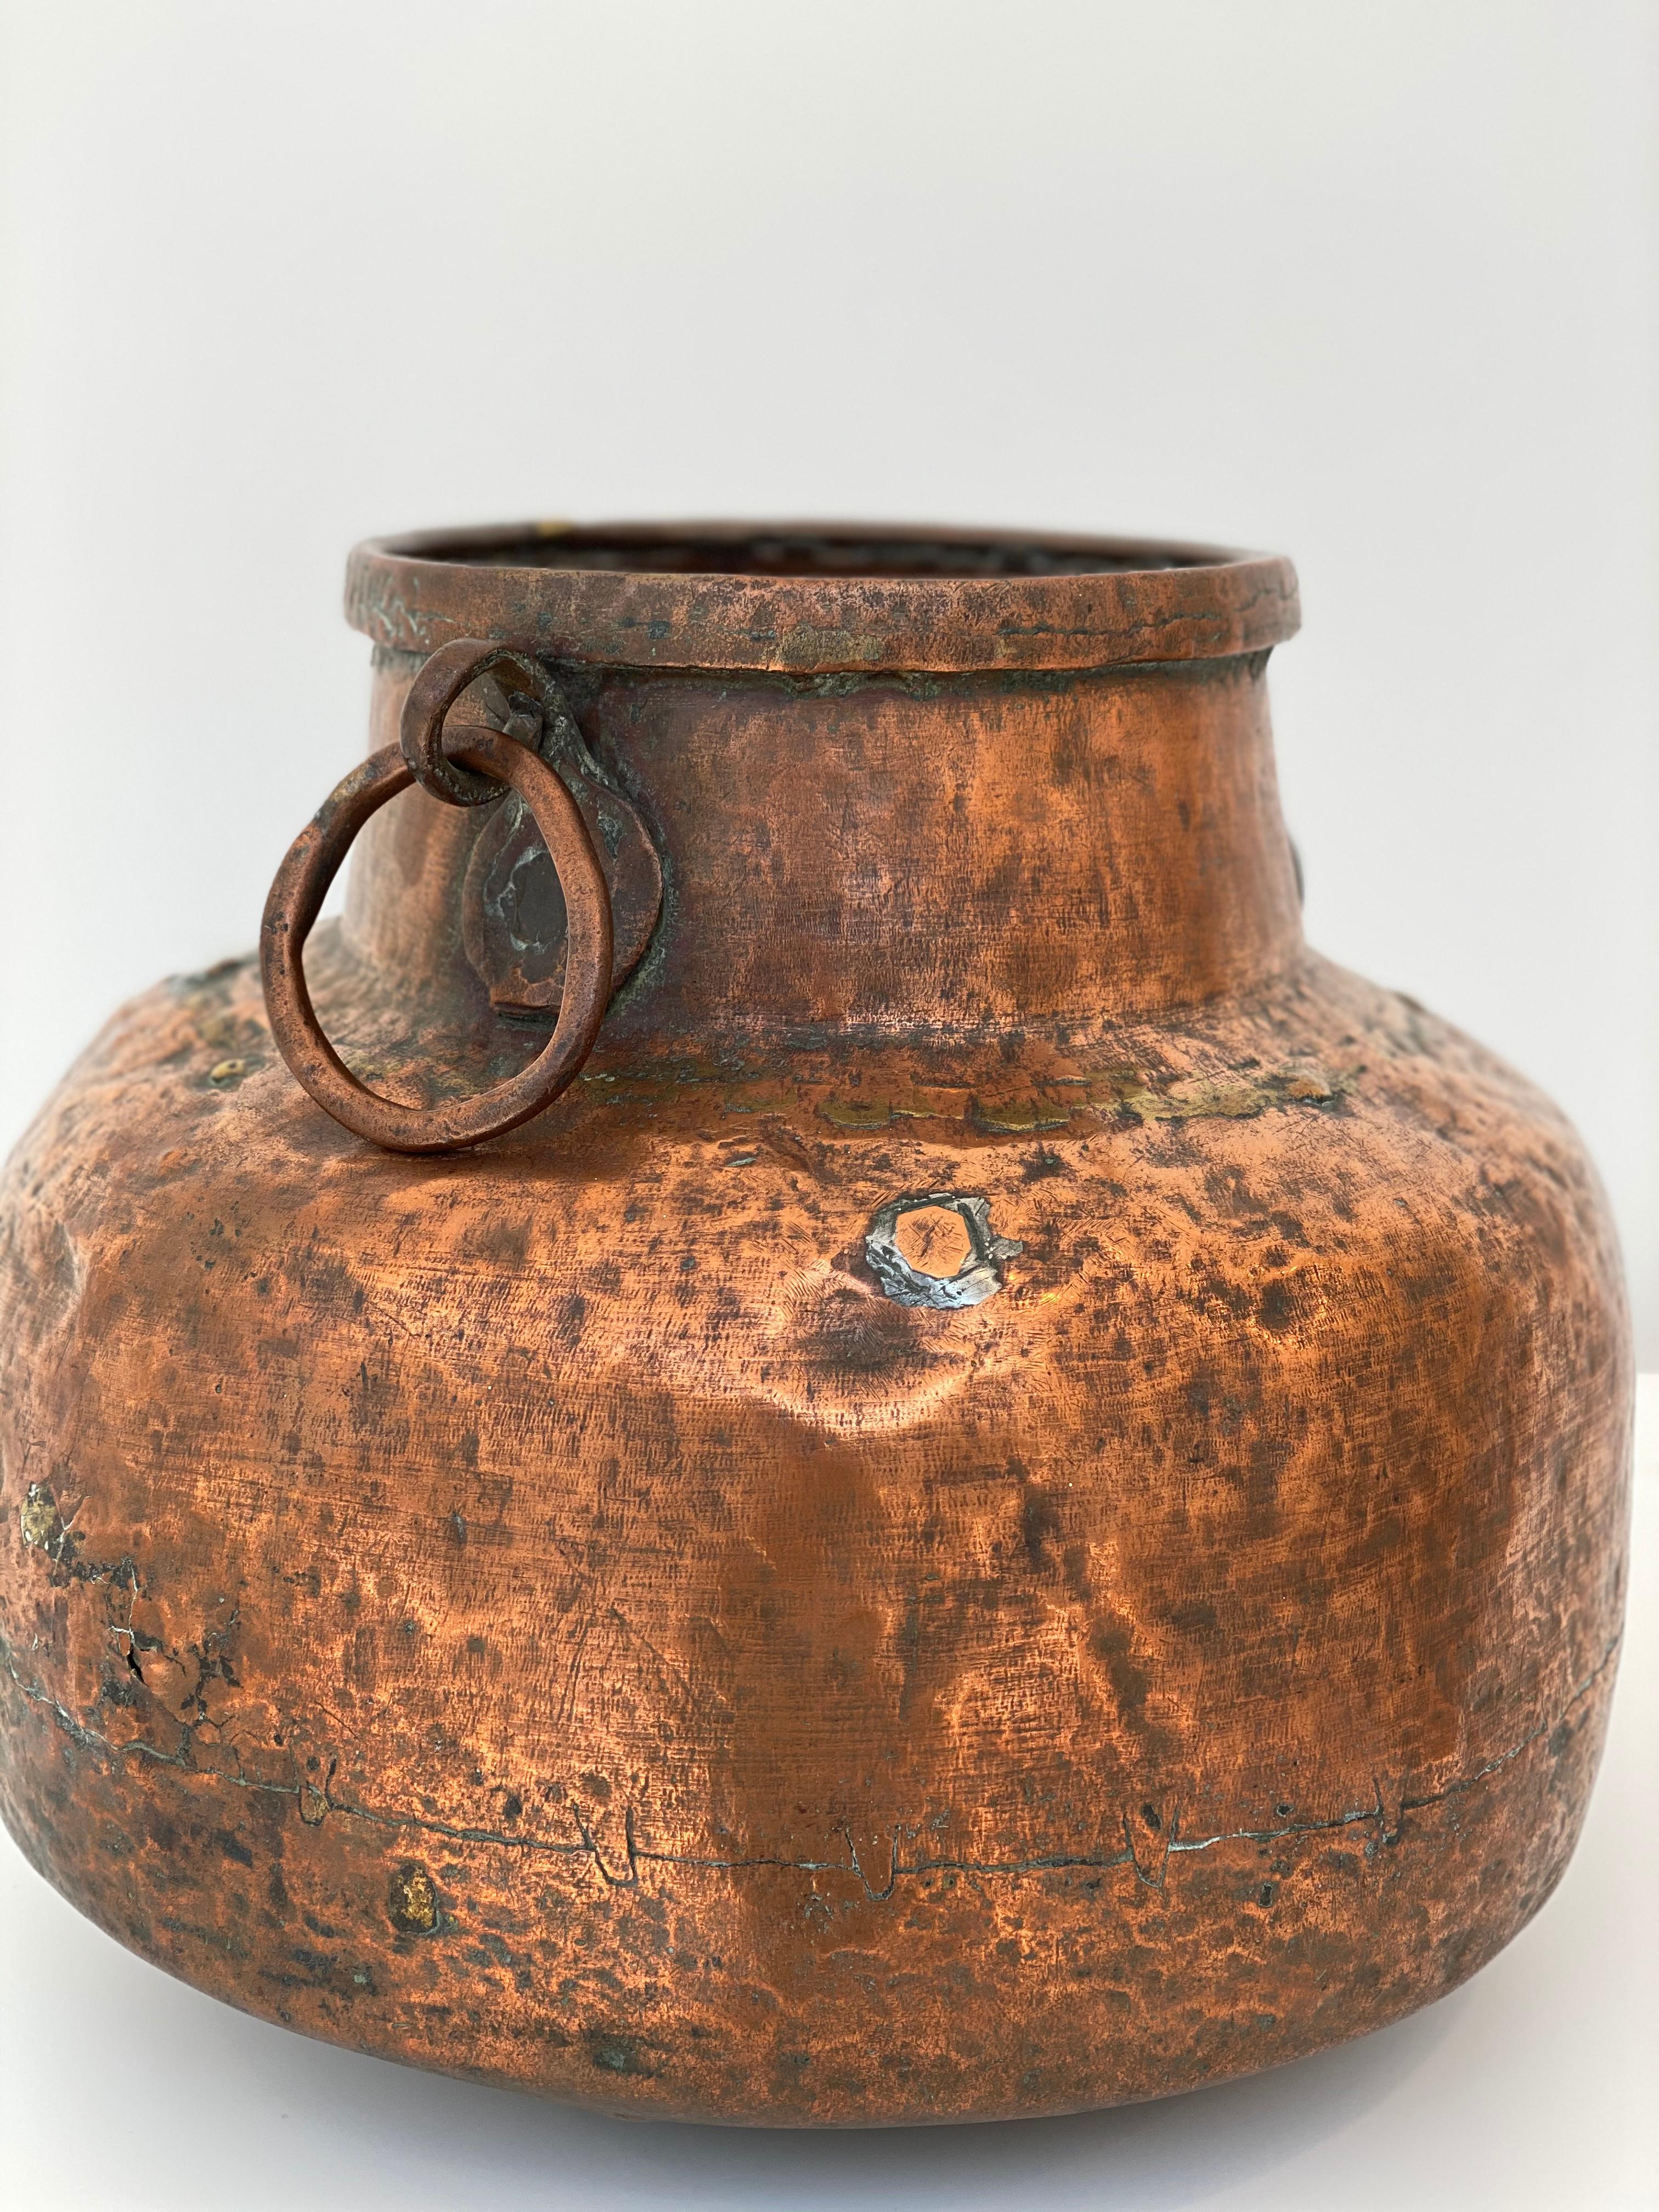 Ottoman Hammered Copper Vessel, 18th Century For Sale 6